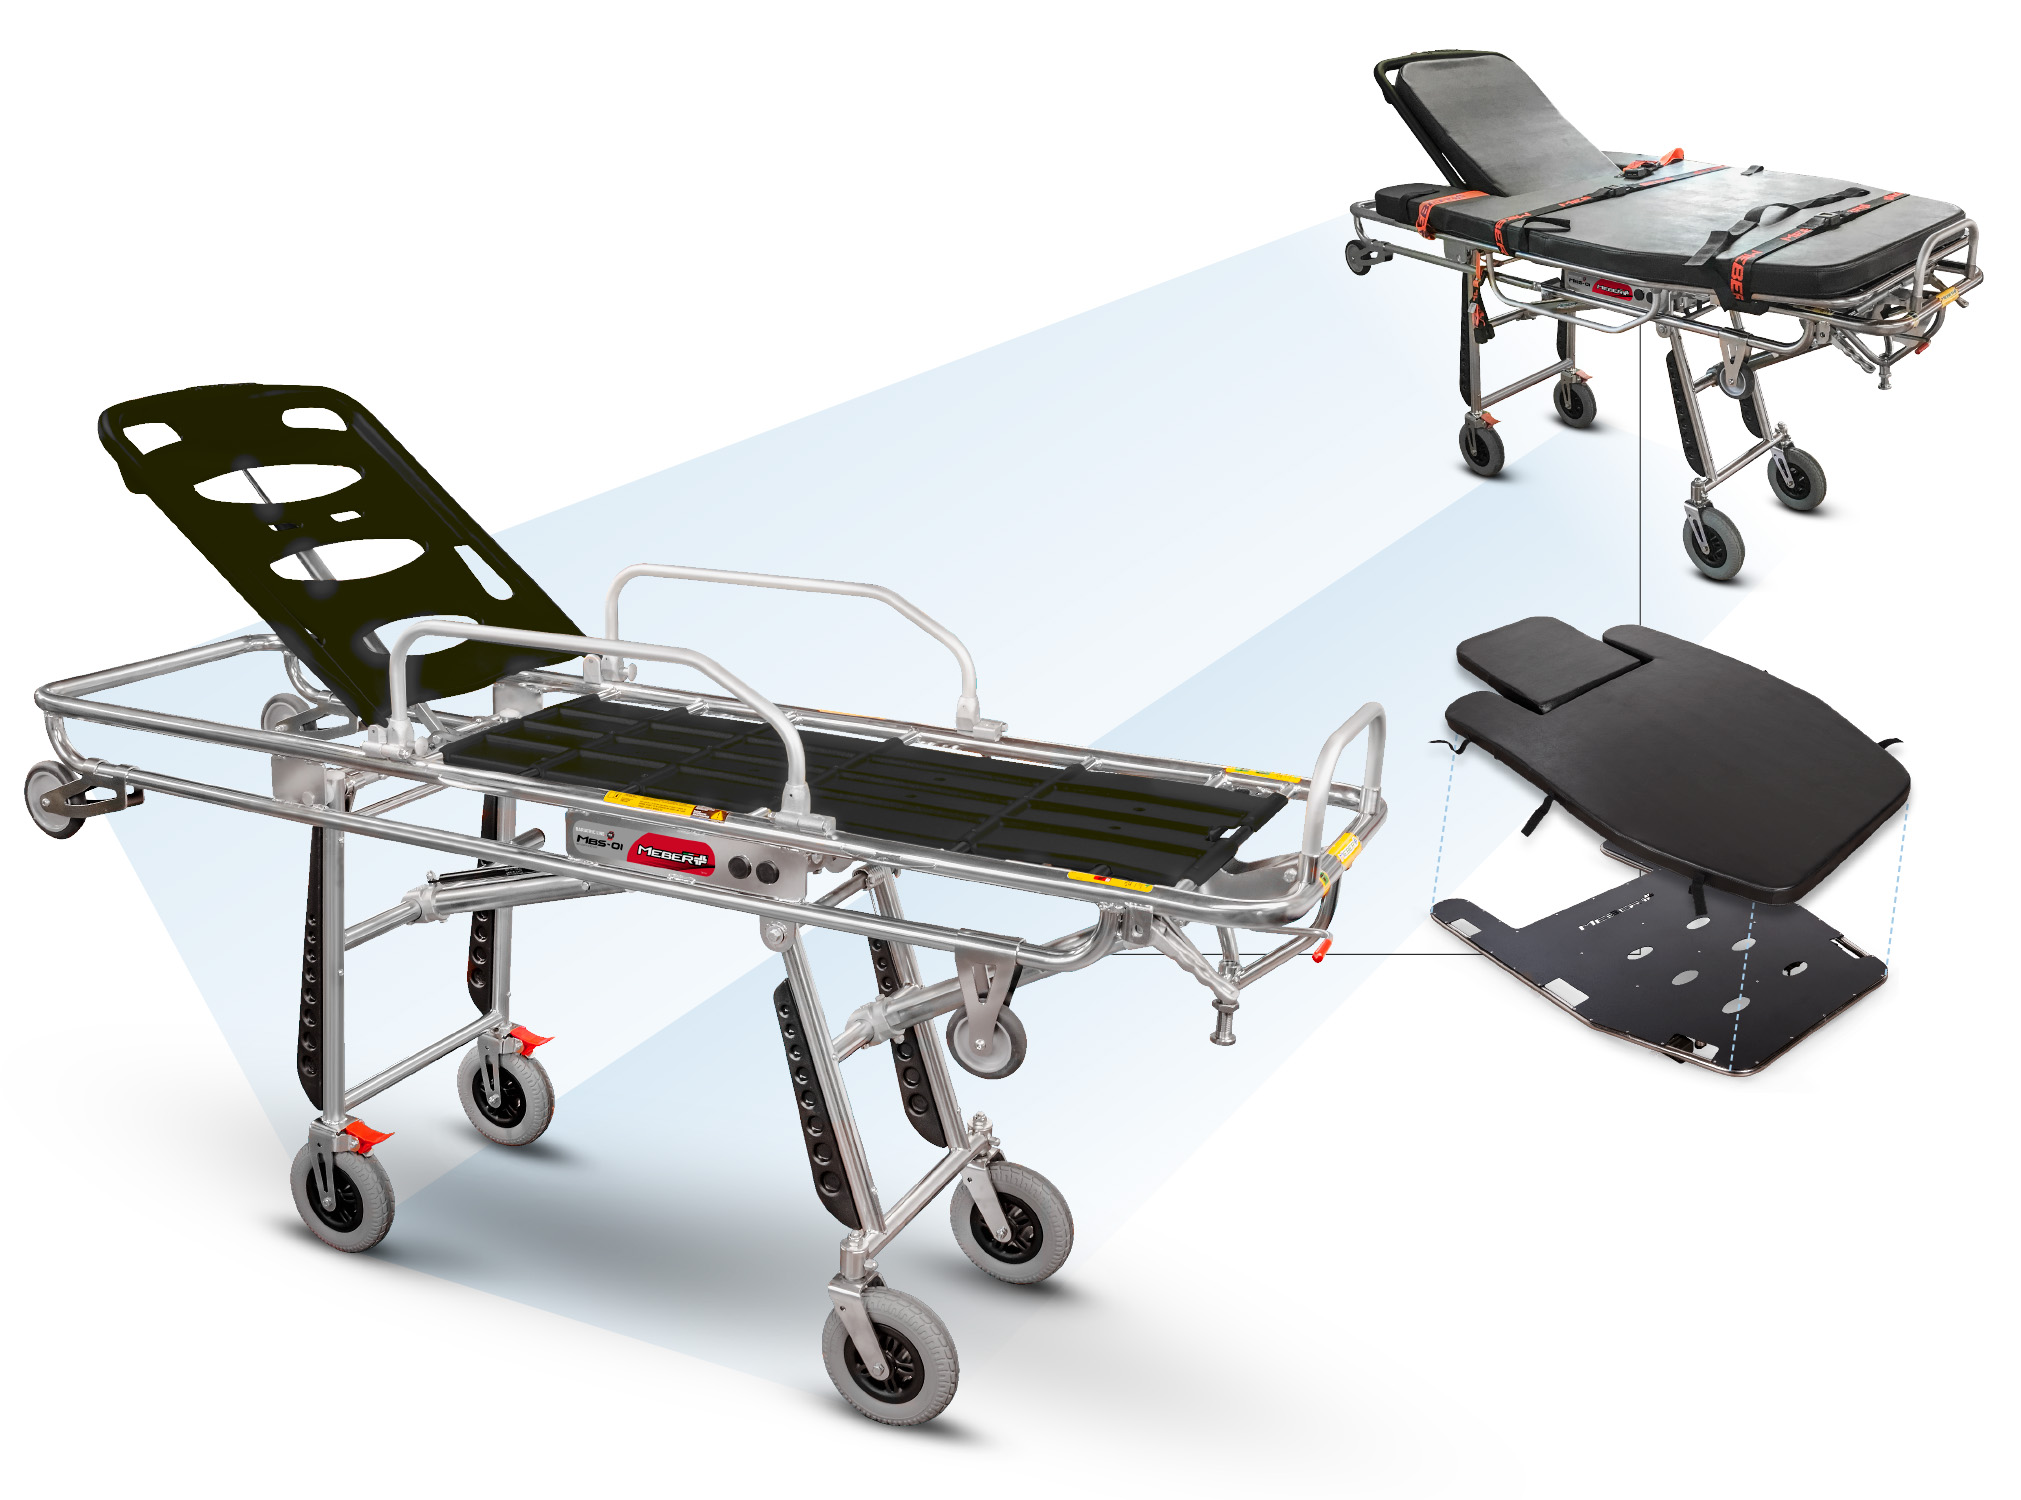 MBS01 - Self-loading stretcher ideal for the transport of bariatric patients